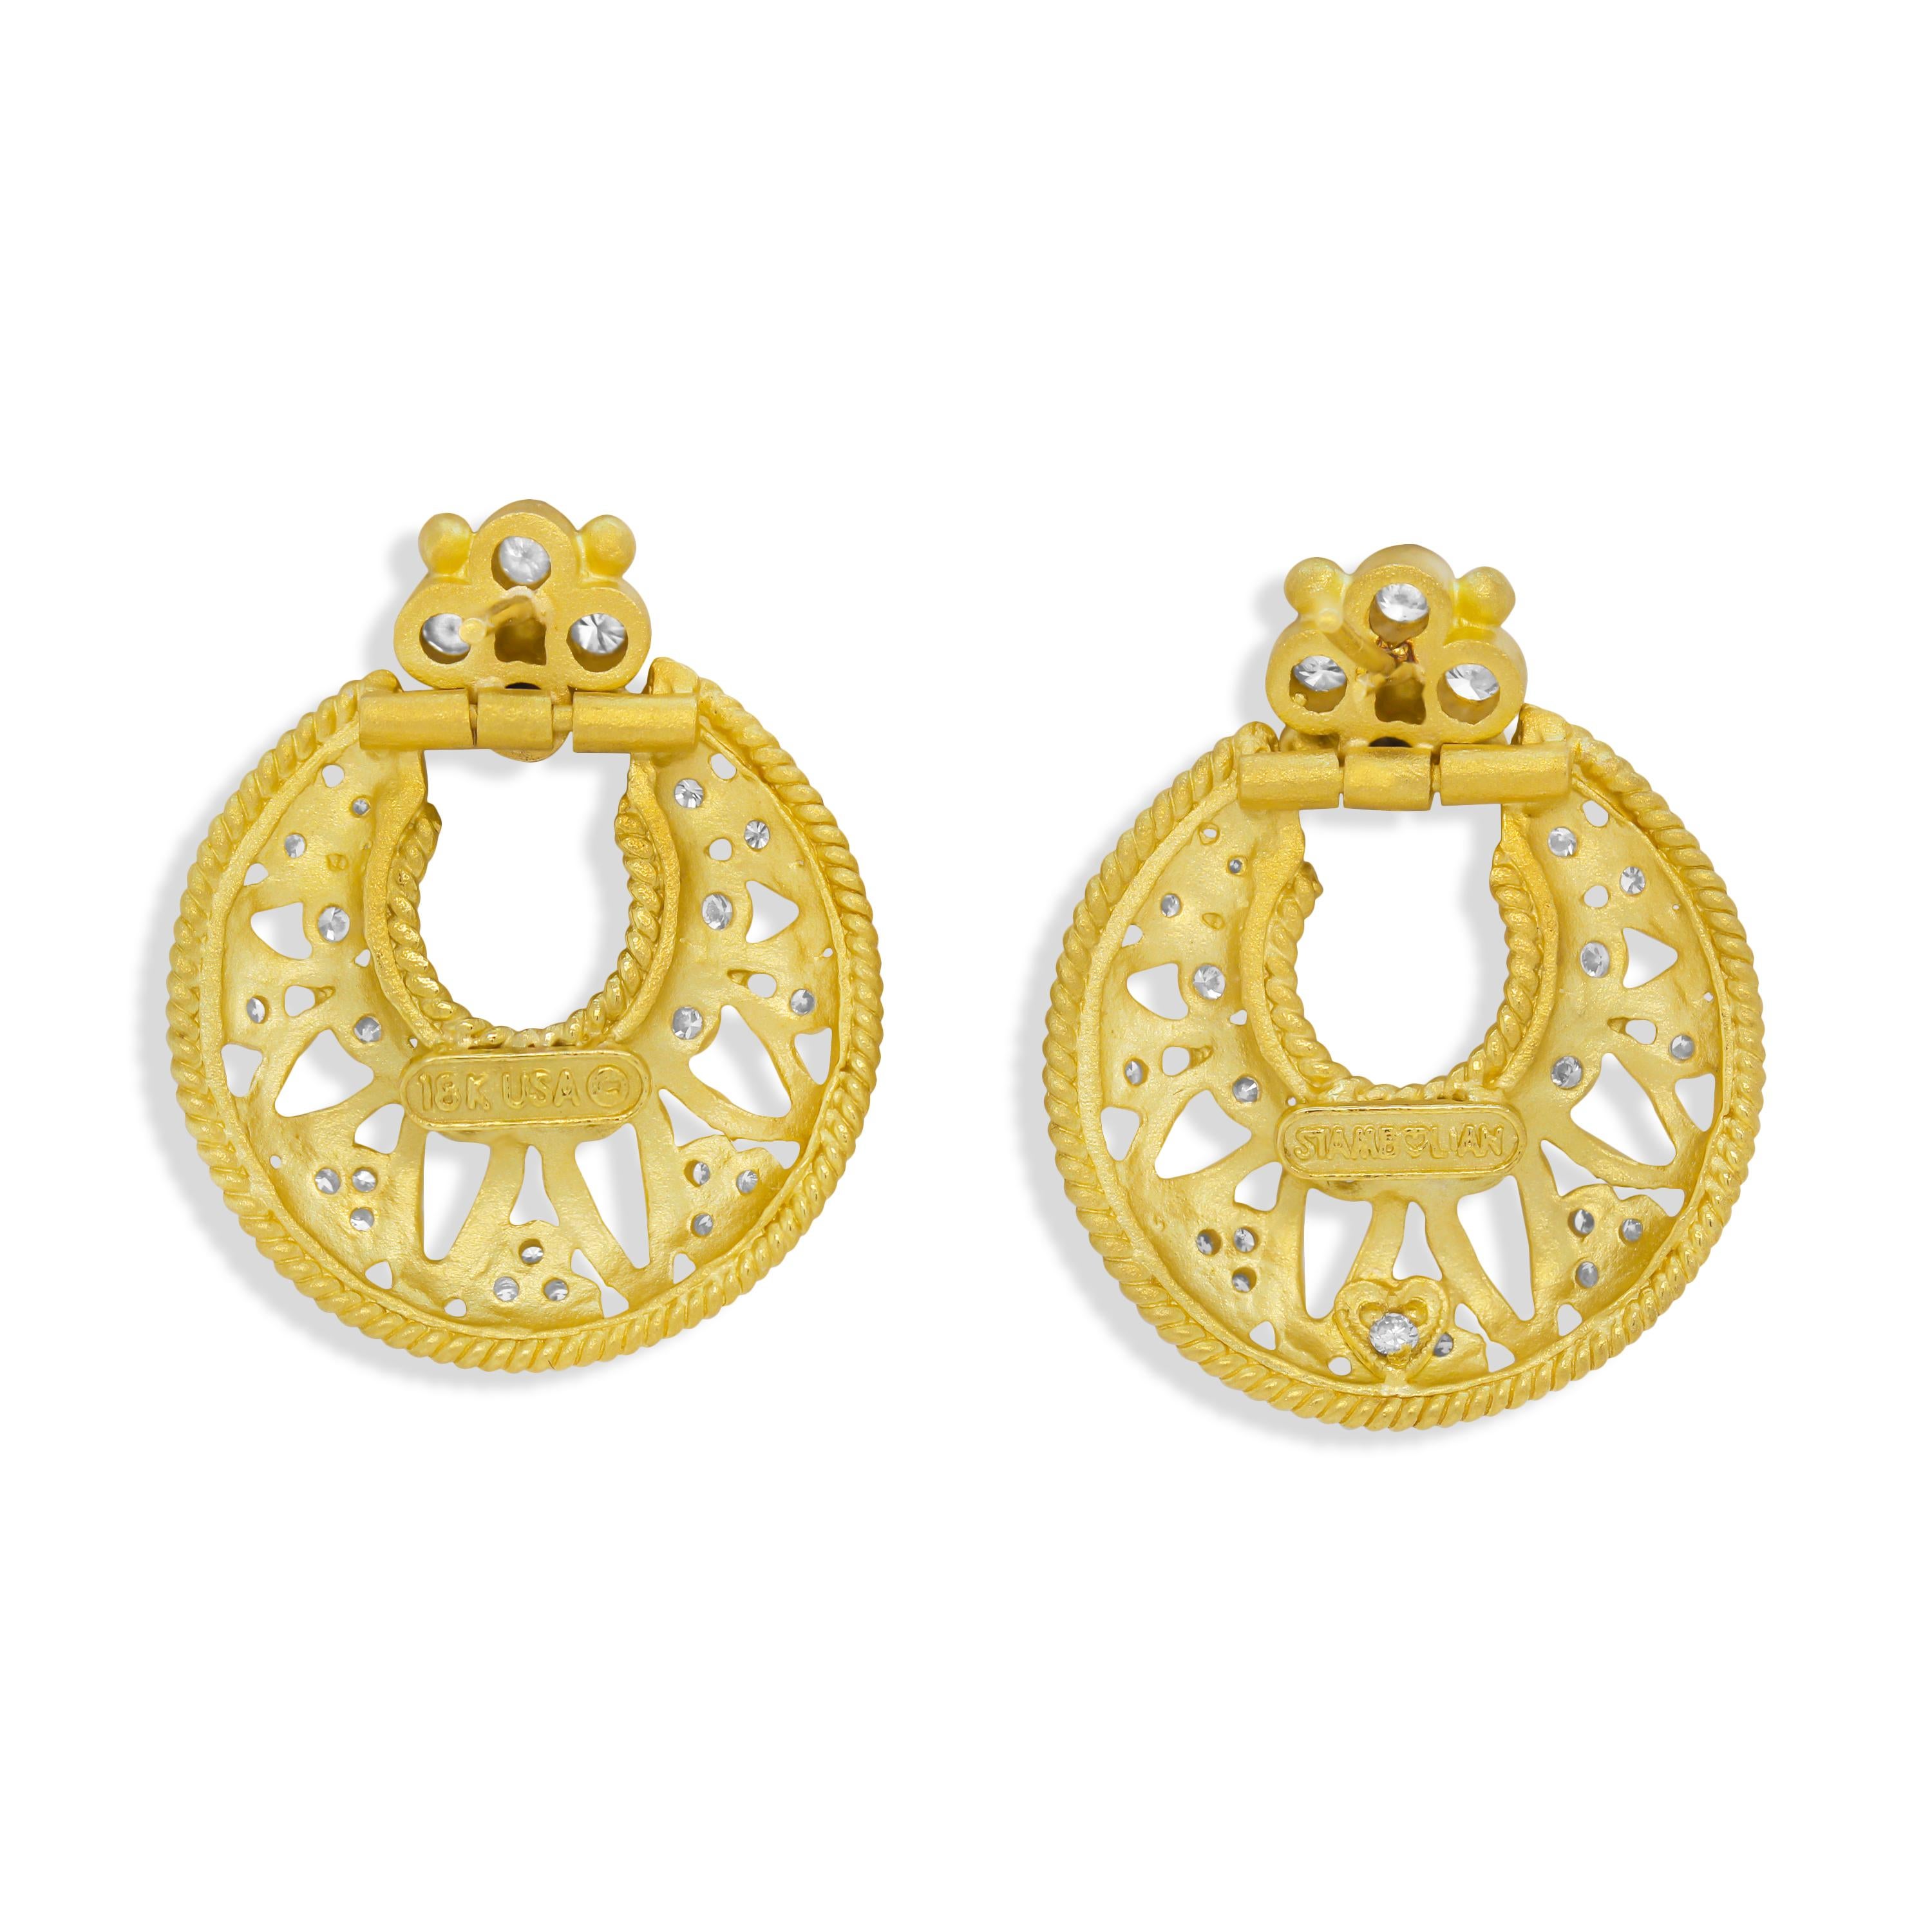 Stambolian 18K Yellow Gold and Bezel Set Diamonds Circle Doorknob Earrings

1 carat G color, VS clarity round cut diamonds

Earrings measure 1.1 inches in length x 0.9 inch width

Earrings use post-friction backs. 

Signed Stambolian and has the